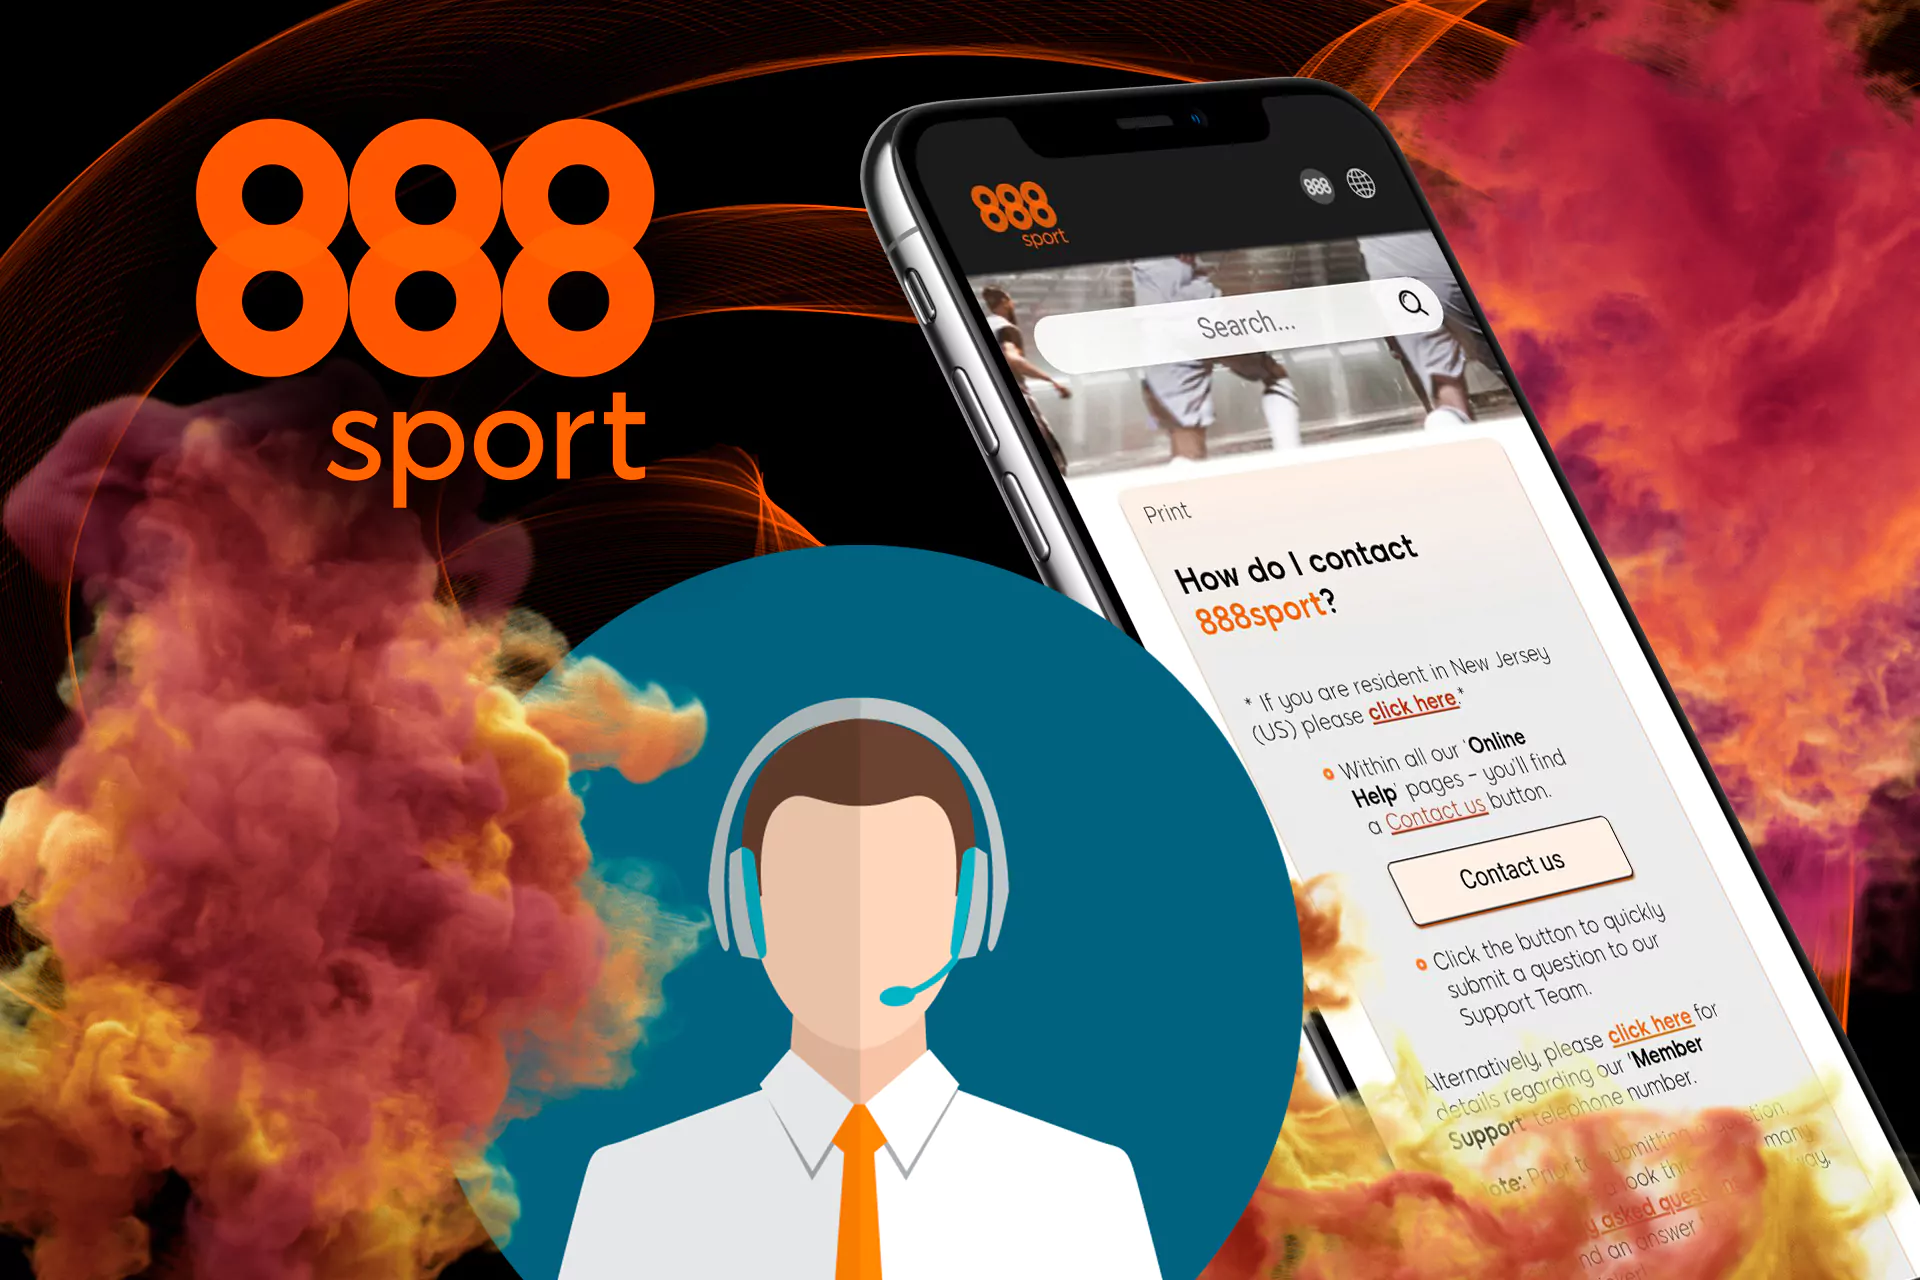 You can contact the 888sport support team whenever you have a problem.